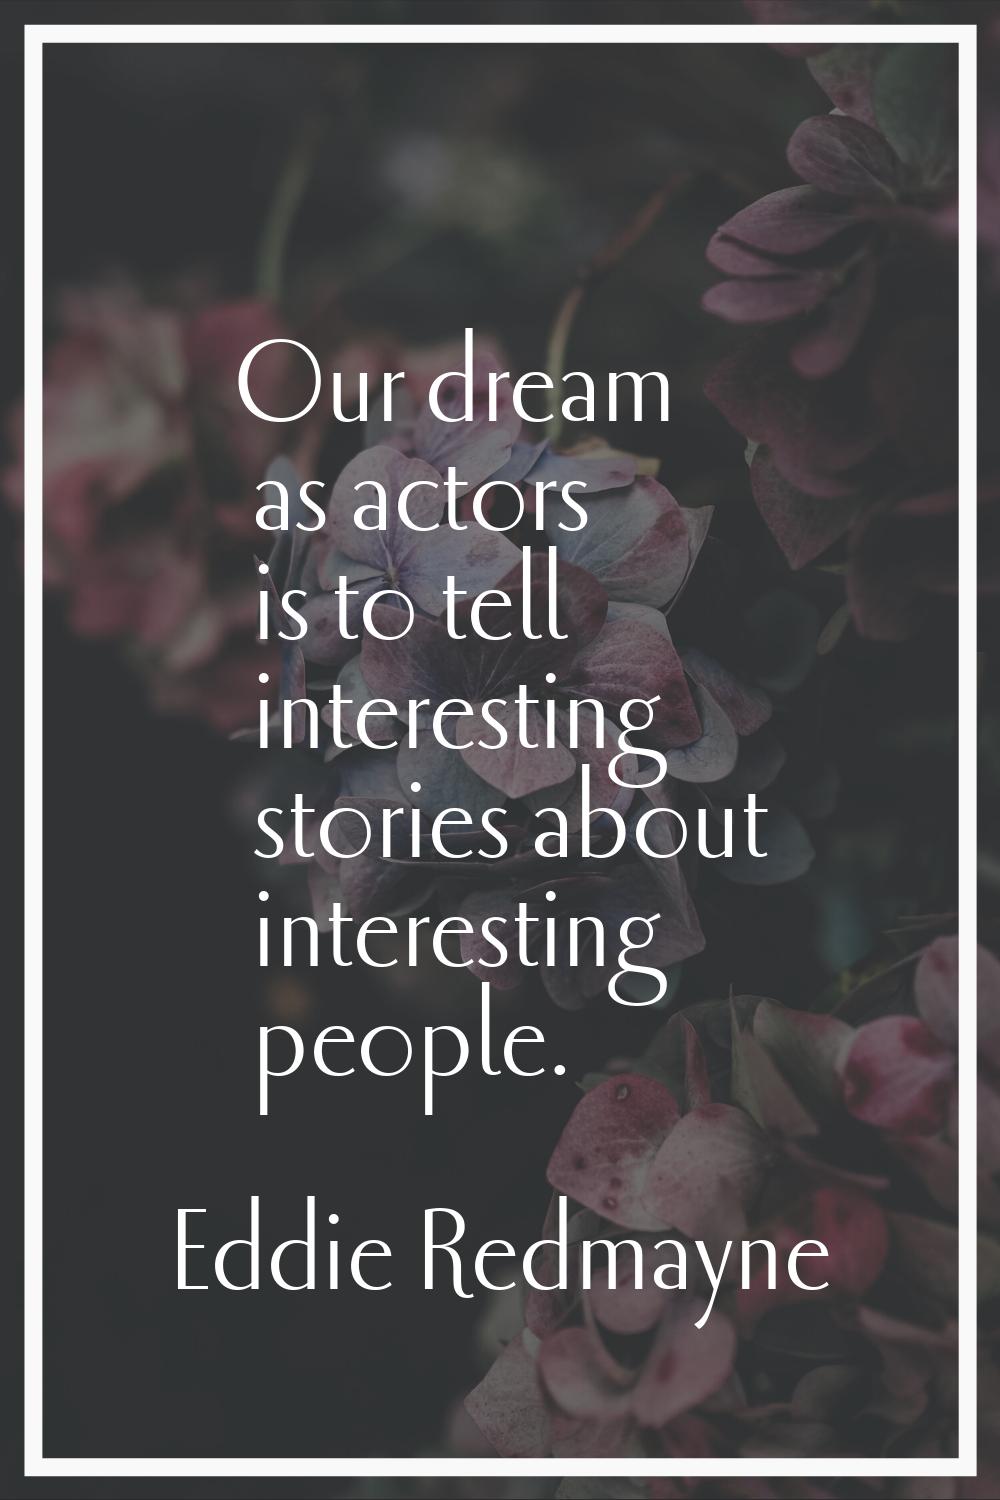 Our dream as actors is to tell interesting stories about interesting people.